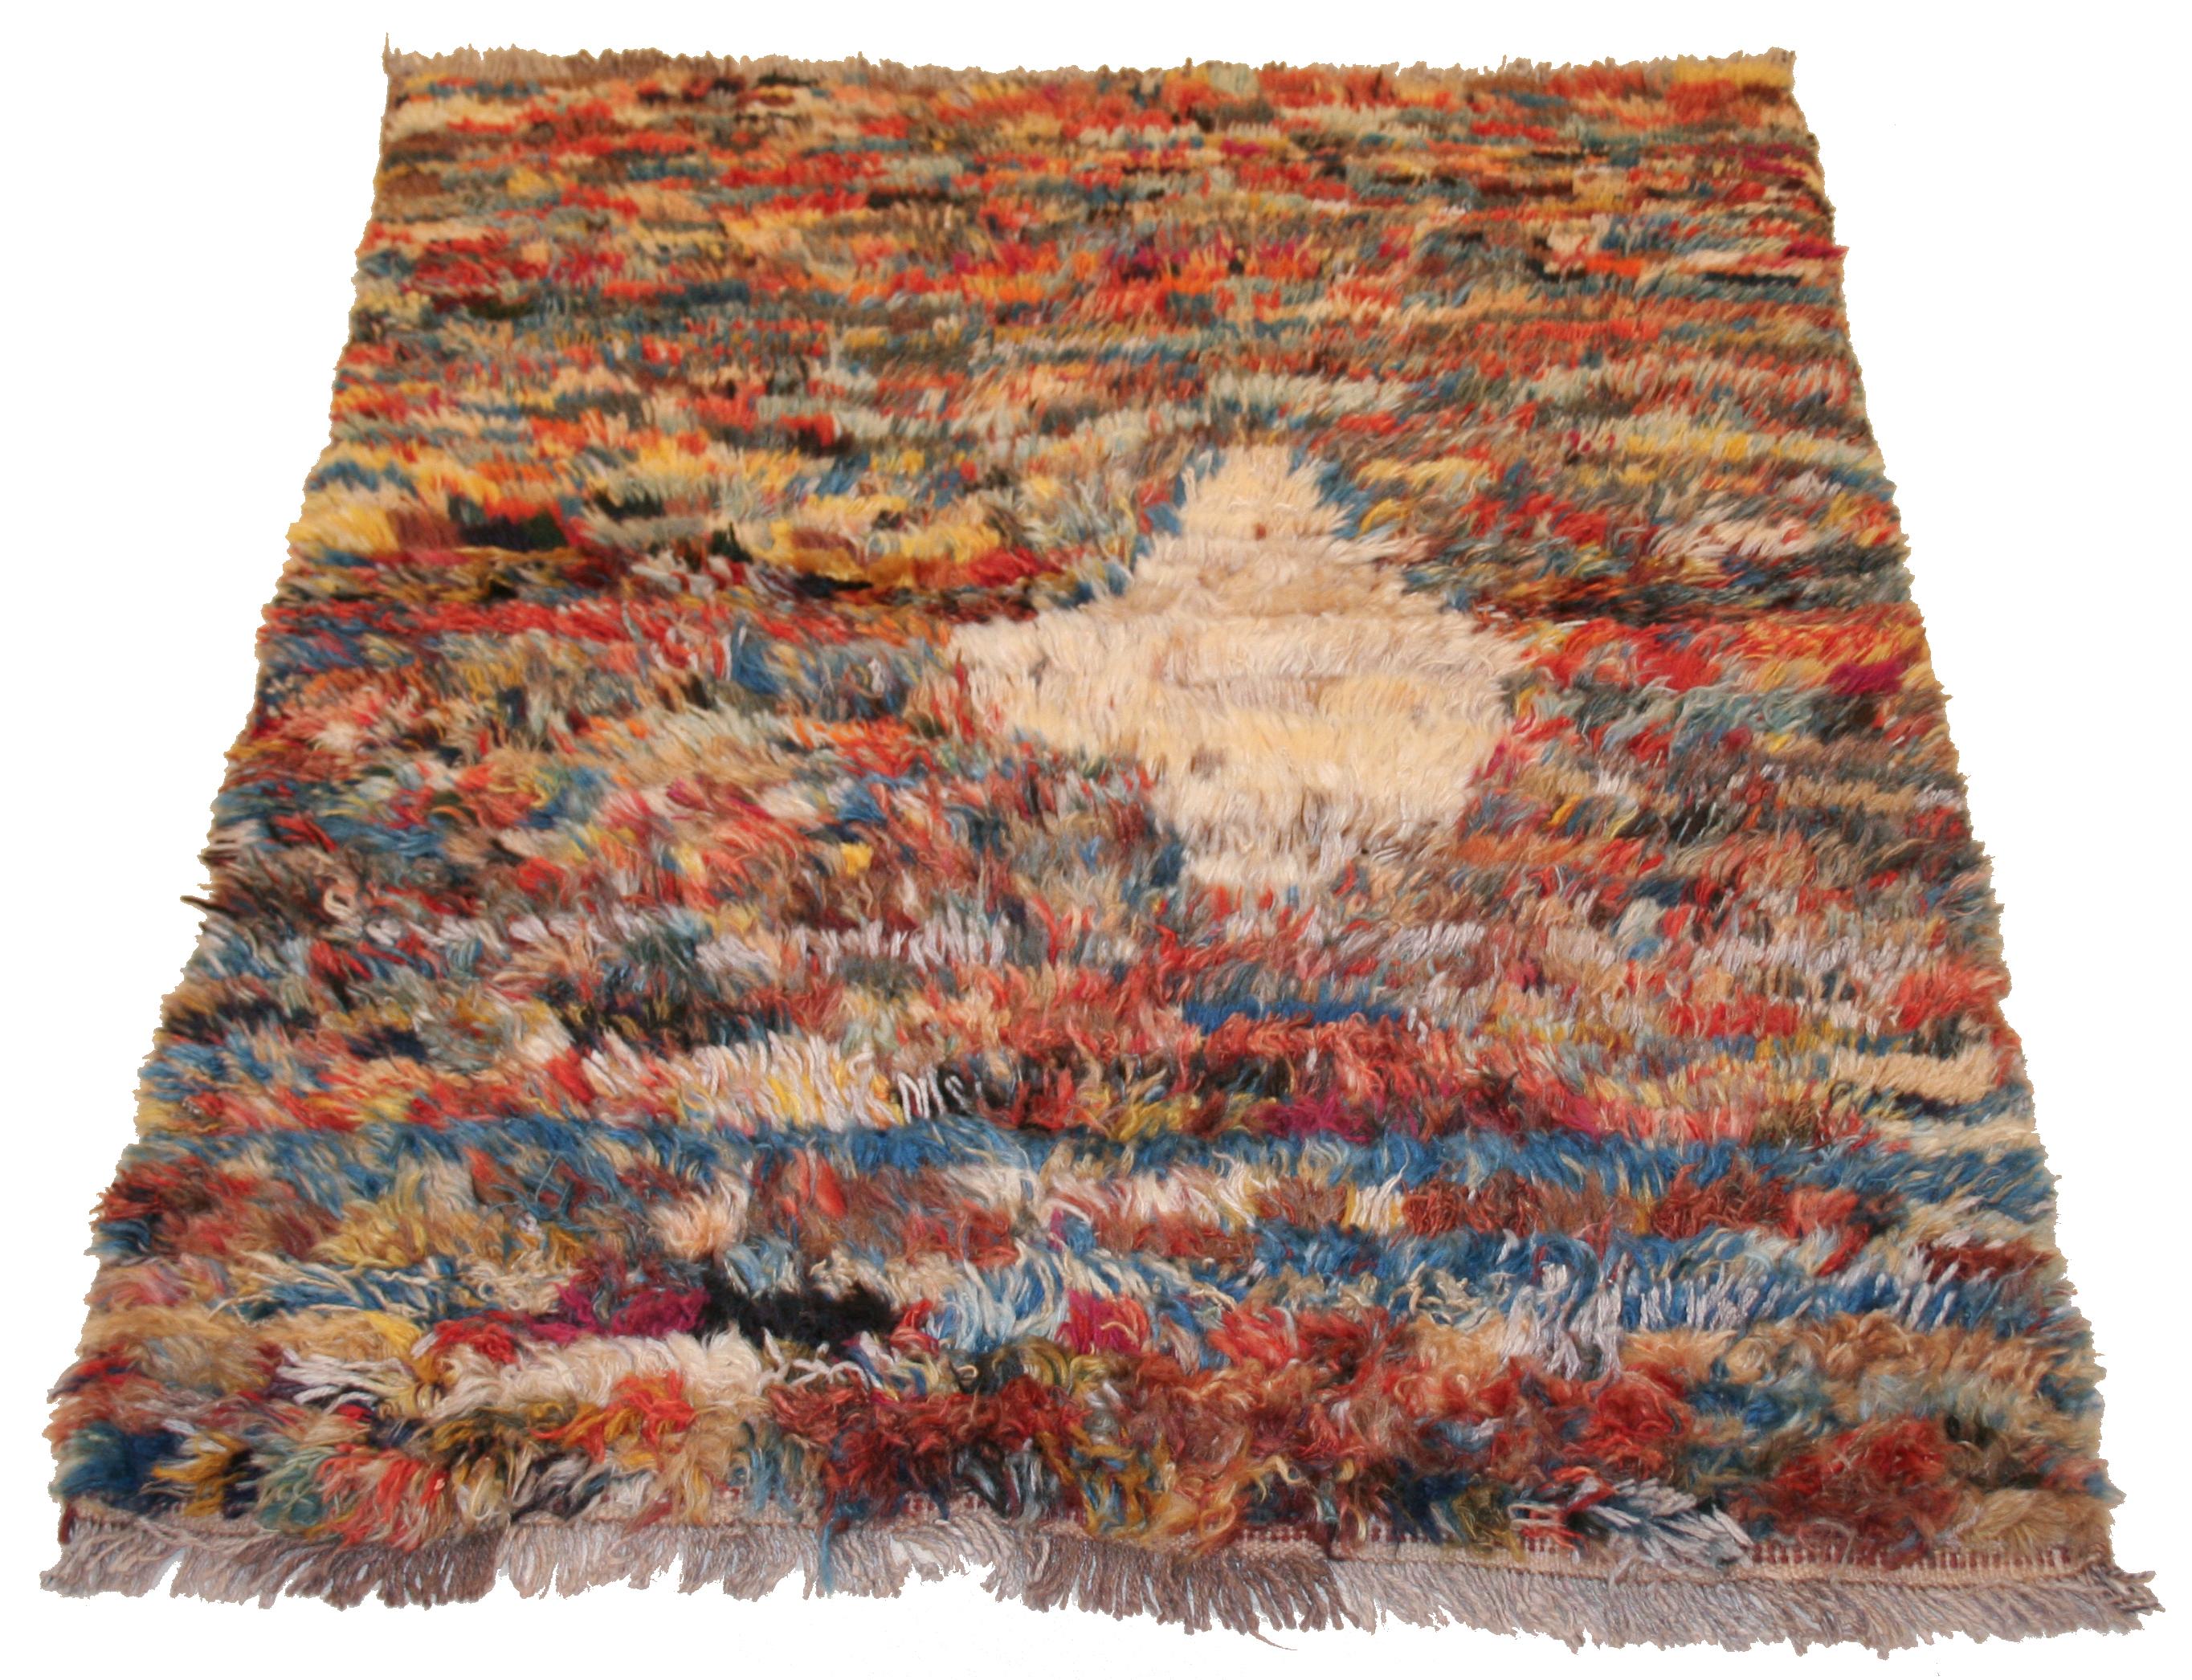 Characterized by a polychrome background obtained through the miscellany of coloured wools, this charming tribal rug is further distinguished by an abstract looking ivory diamond element placed off the central axis of the composition. A genuinely